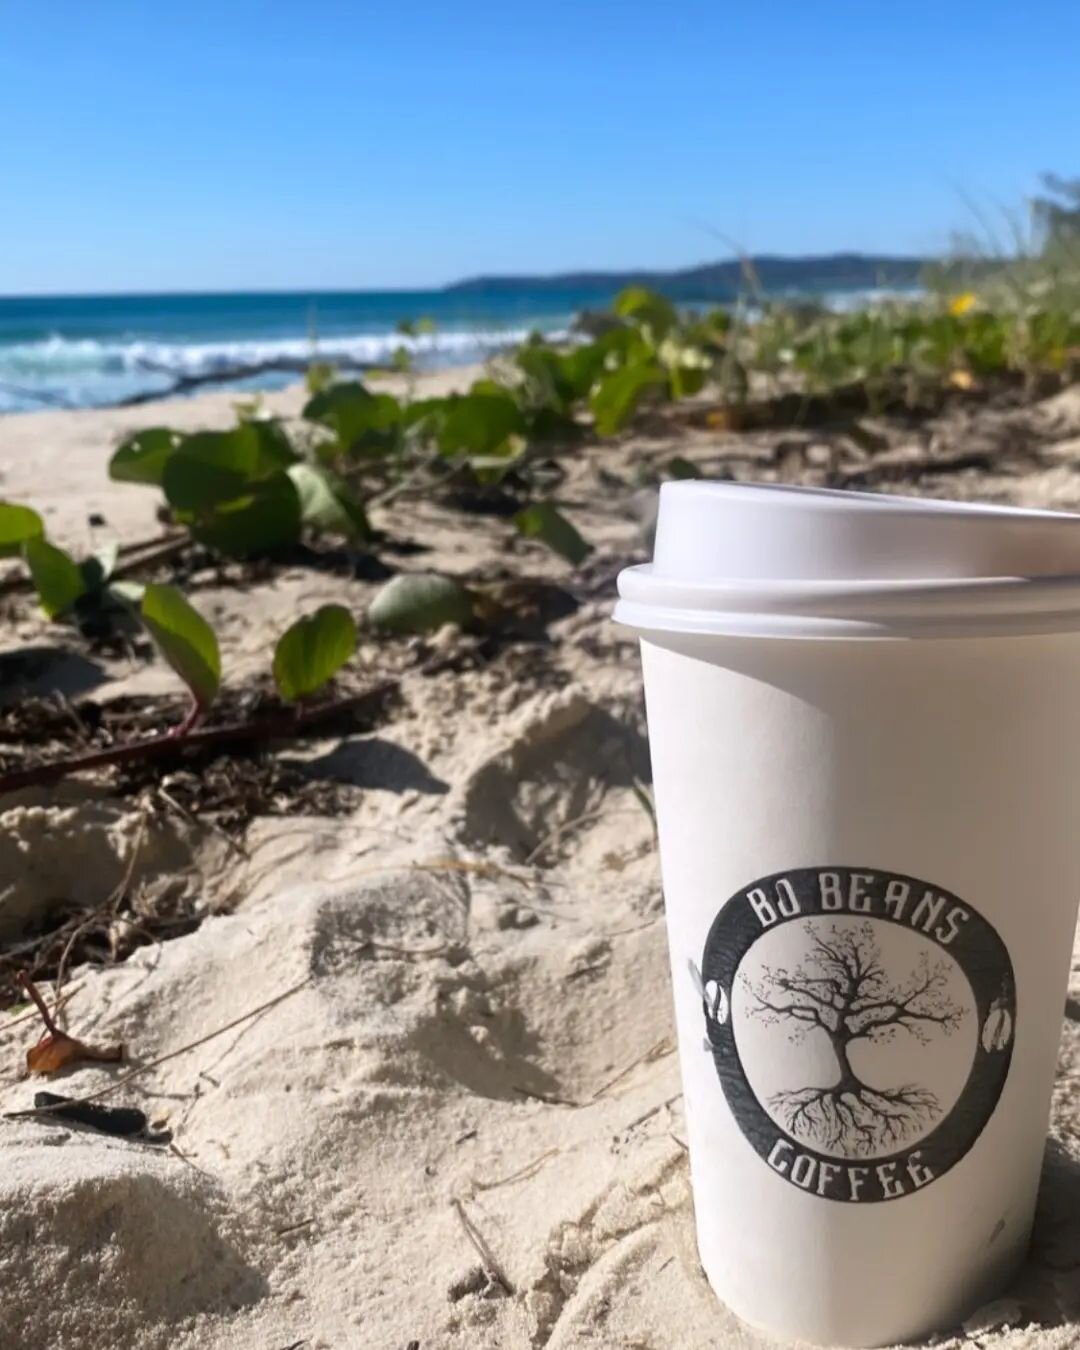 ☕ Grab a brew and find a view 😉

🏝️ We may not be on the water front, but there's nothing stopping you from grabbing that morning coffee and walking 5mins out to the beach ⛱️

🚘 Maybe it's a drive back to the jetty or down to Flinders beach ⛱️

Wh